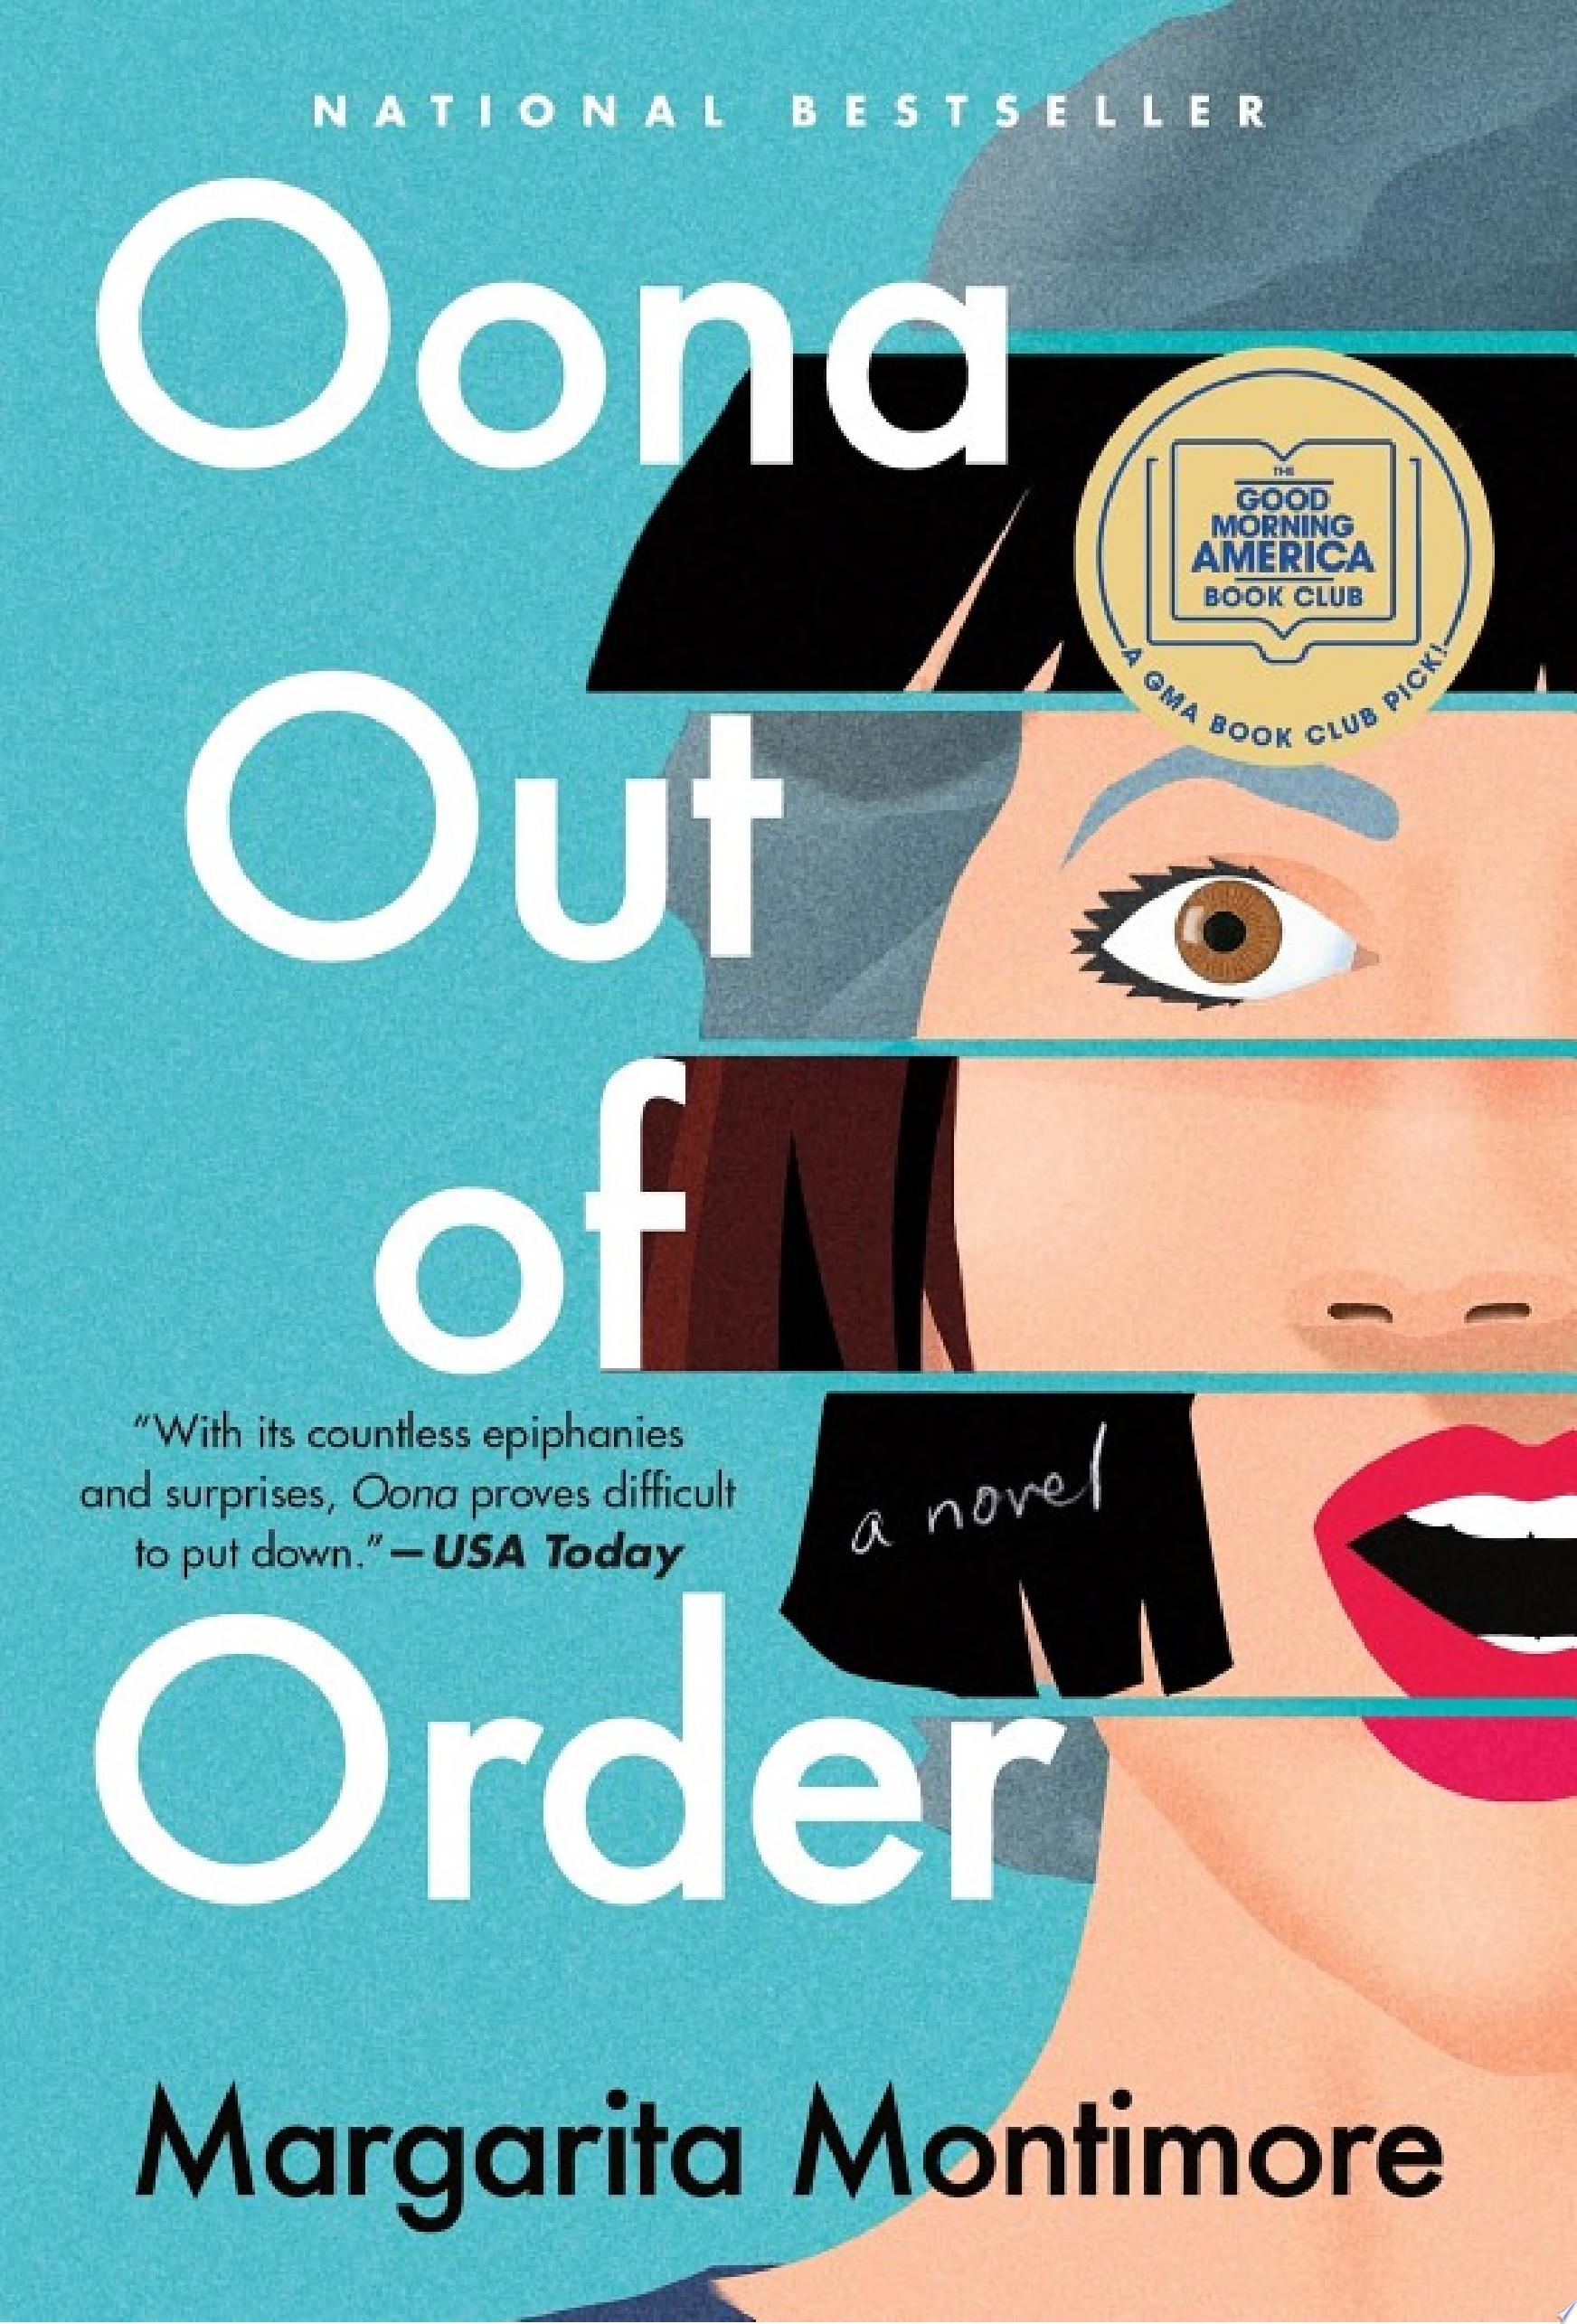 Image for "Oona Out of Order"